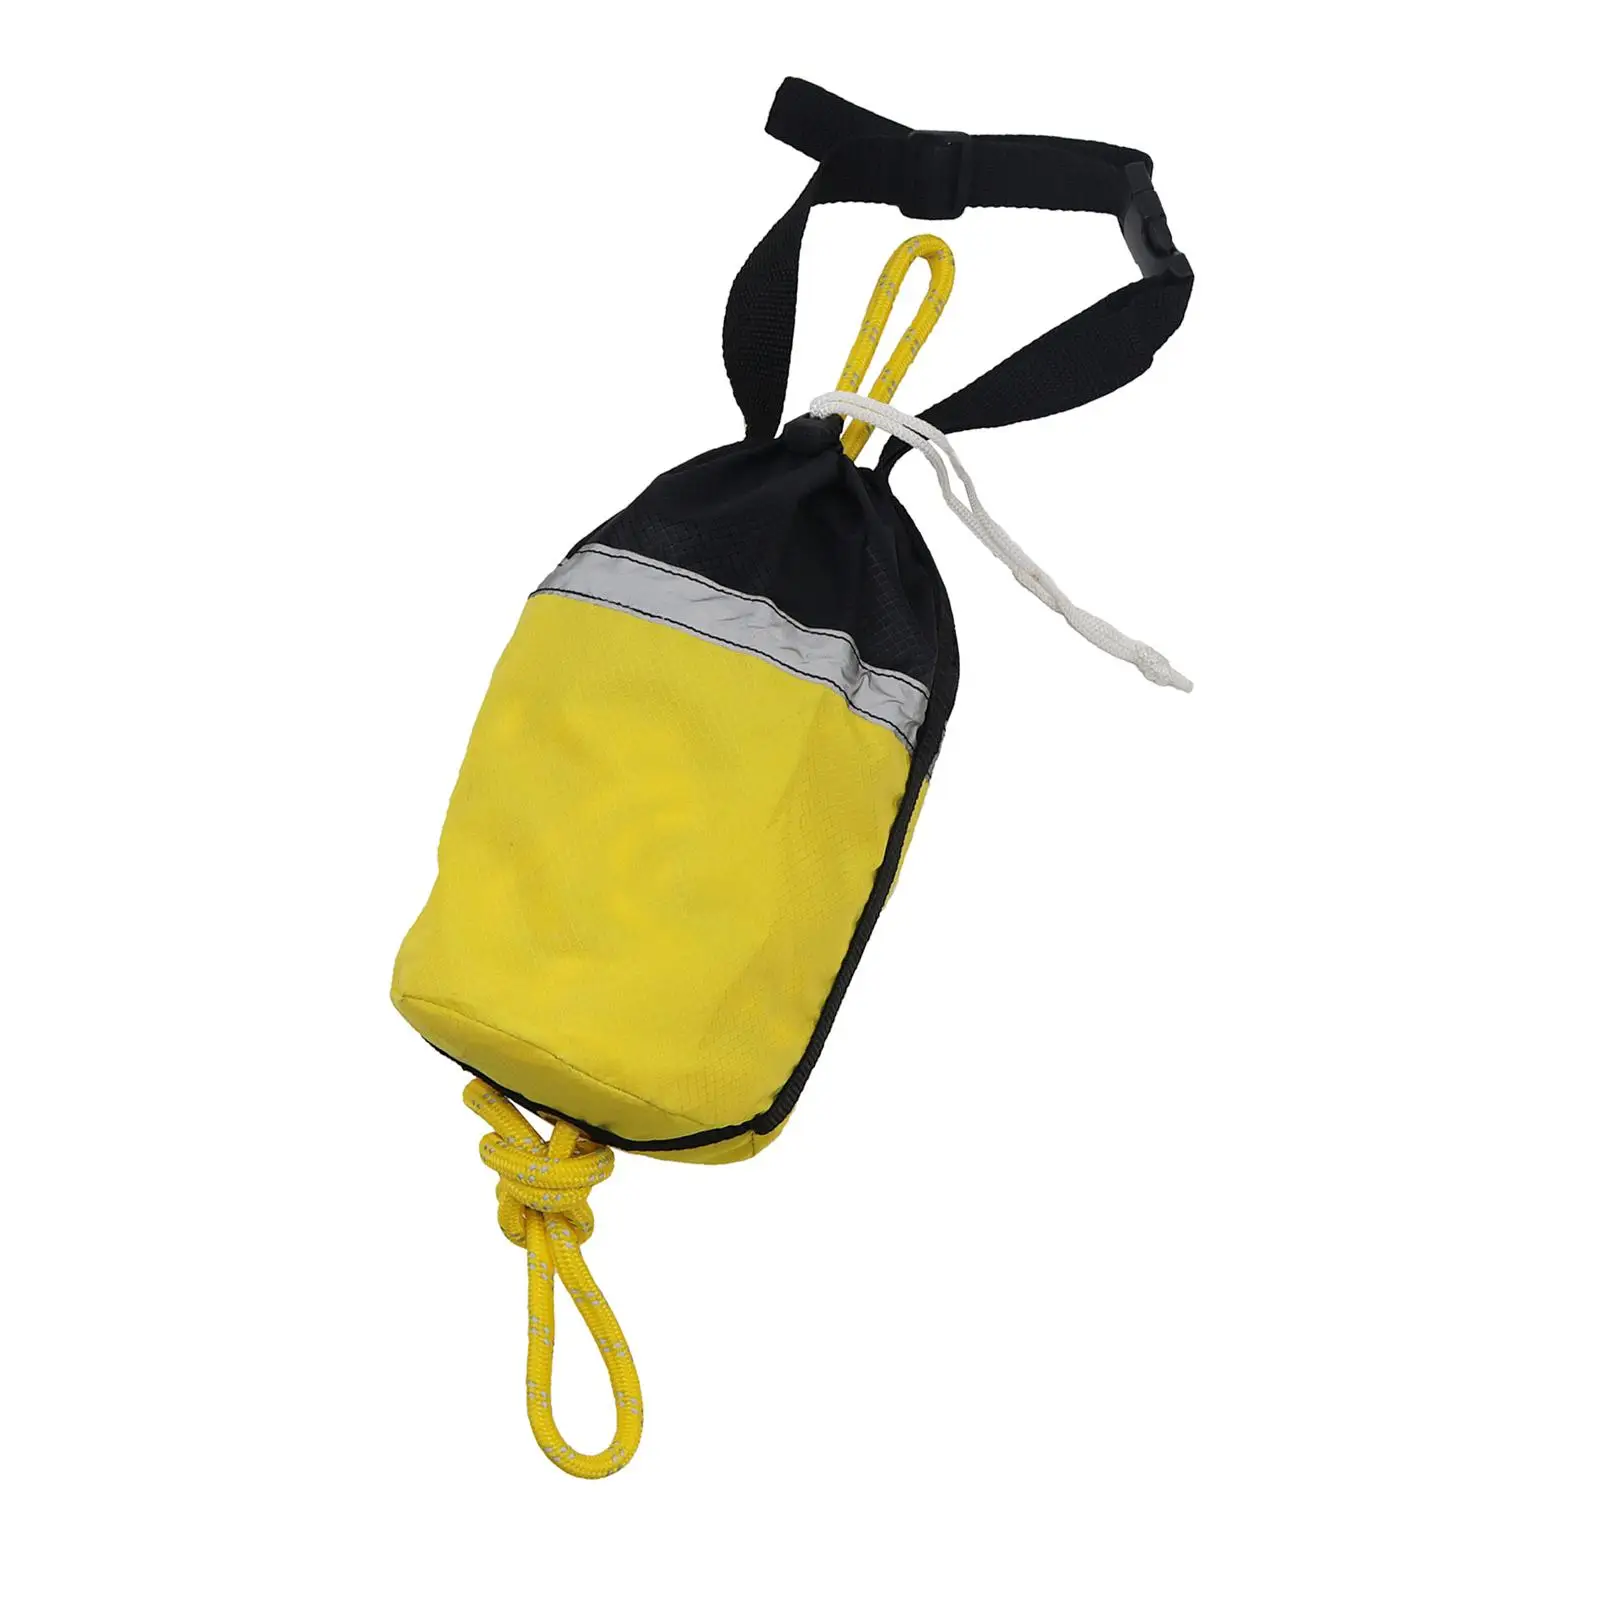 Throw Bag with 16M Throw Rope Throwable for Ice Fishing Boating Water Sports